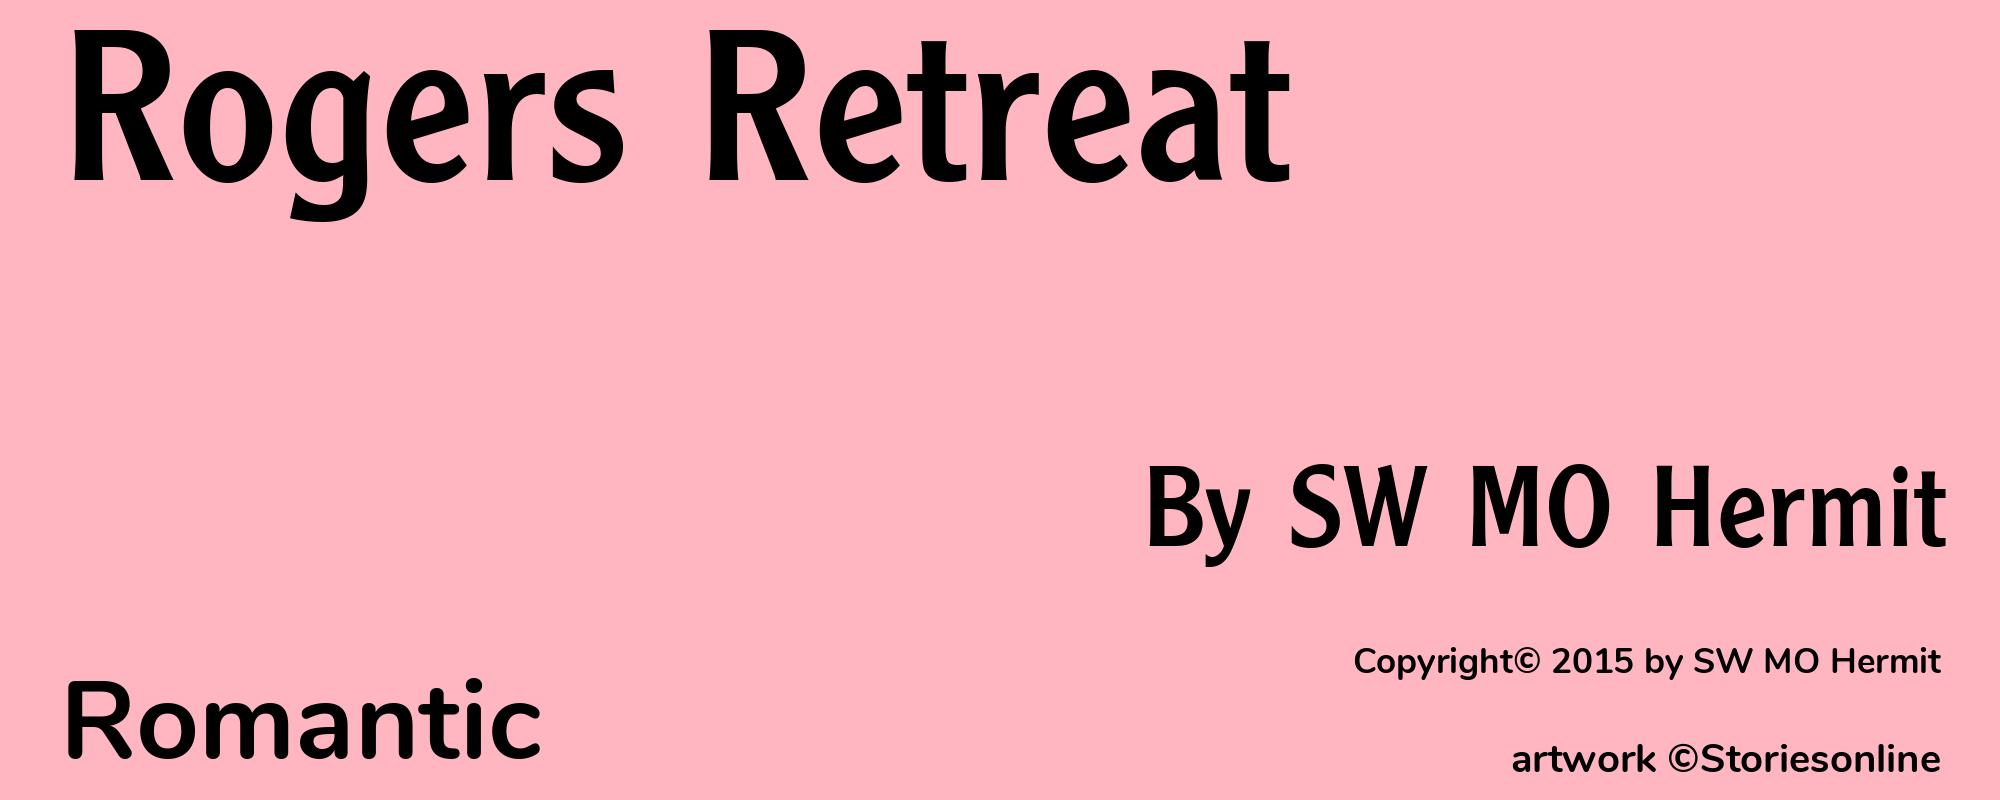 Rogers Retreat - Cover